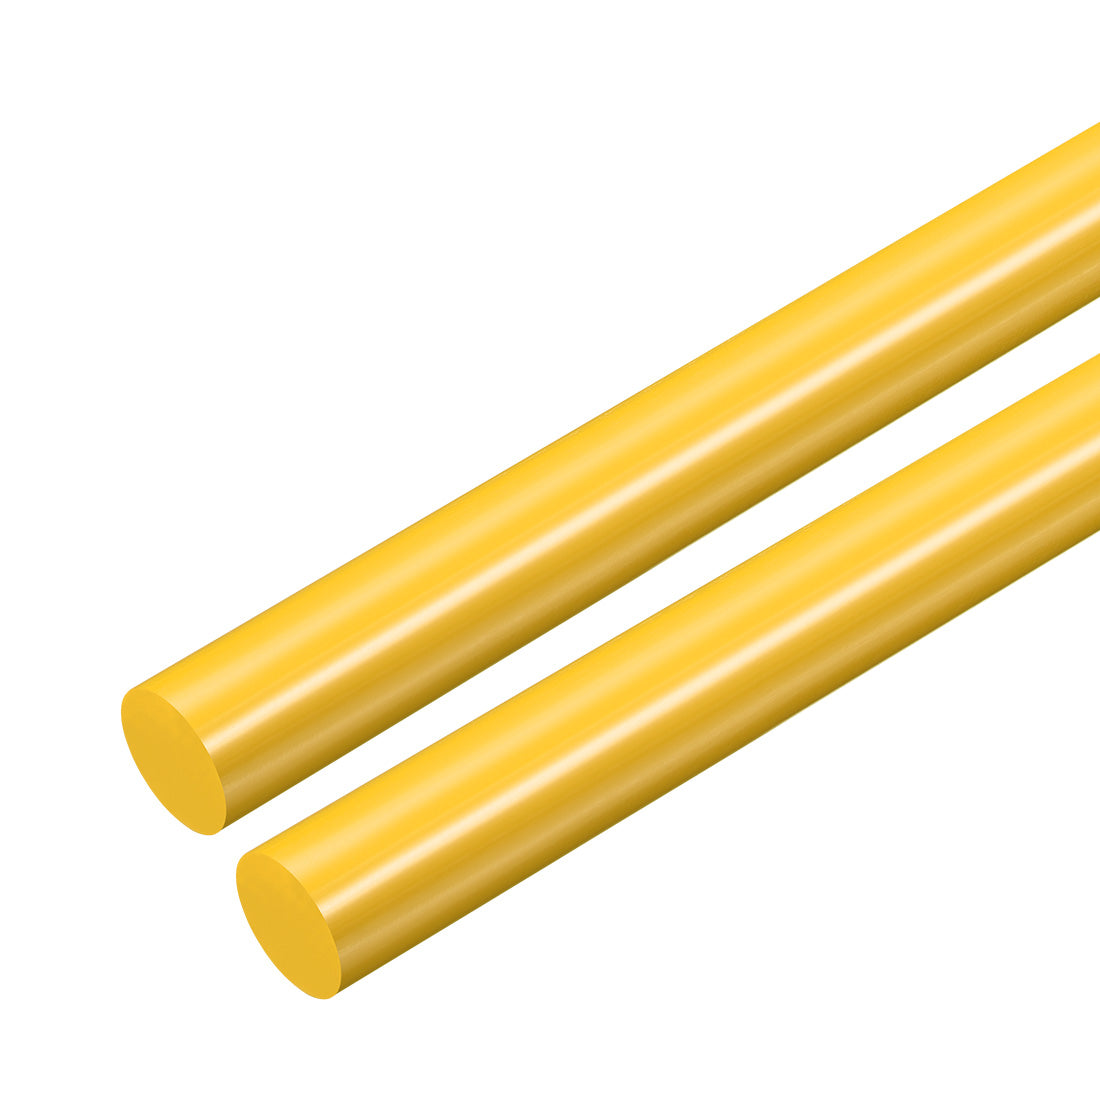 uxcell Uxcell Plastic Round Rod,15mm Dia 50cm Yellow Engineering Plastic Round Bar 2pcs